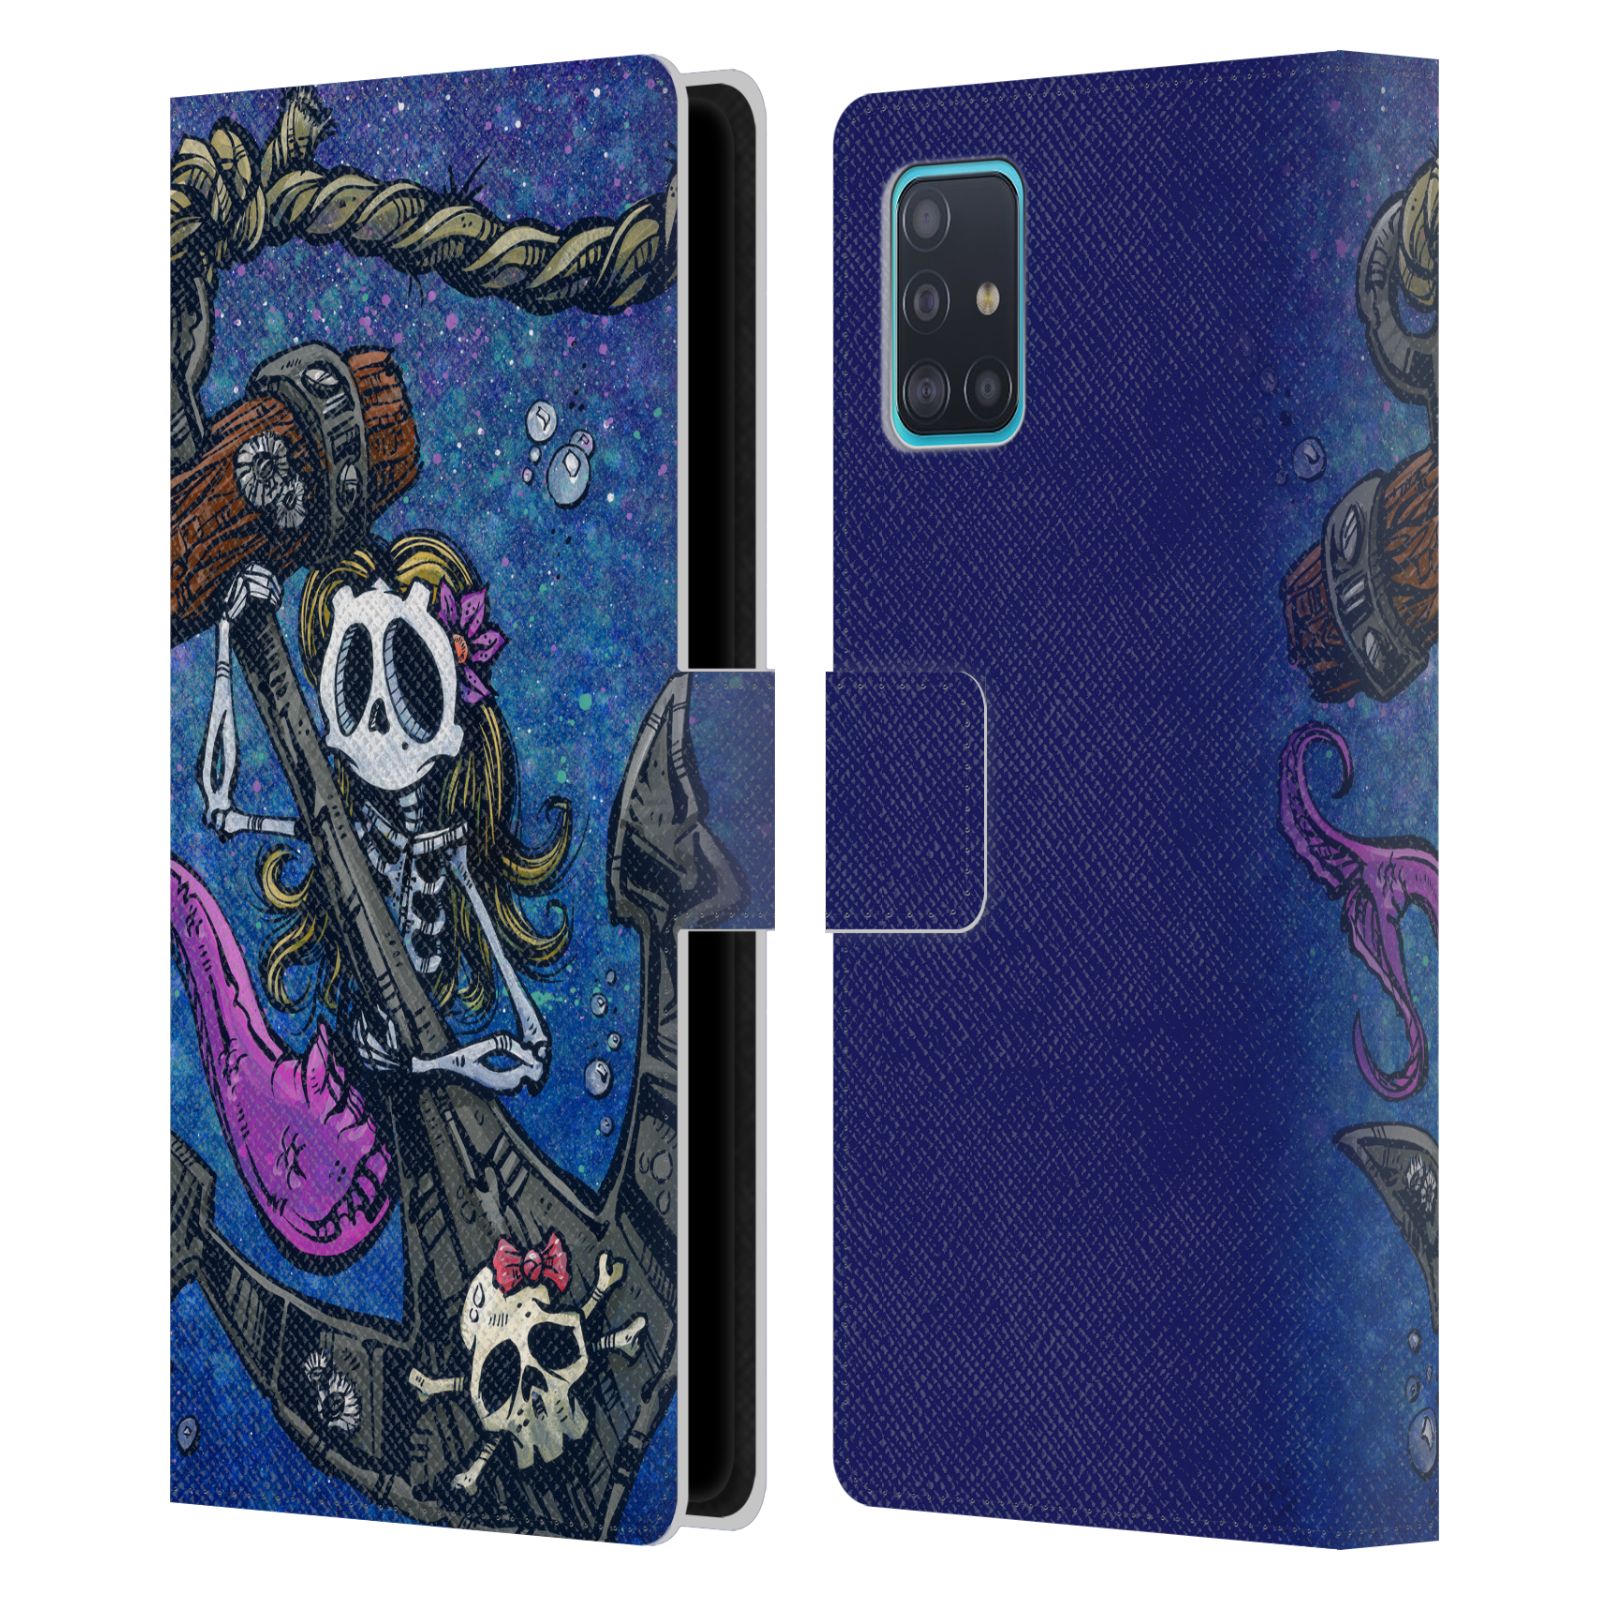 Head Case Designs Officially Licensed David Lozeau Colourful Grunge Mermaid Anchor Leather Book Wallet Case Cover Compatible with Samsung Galaxy A51 (2019) - image 1 of 6